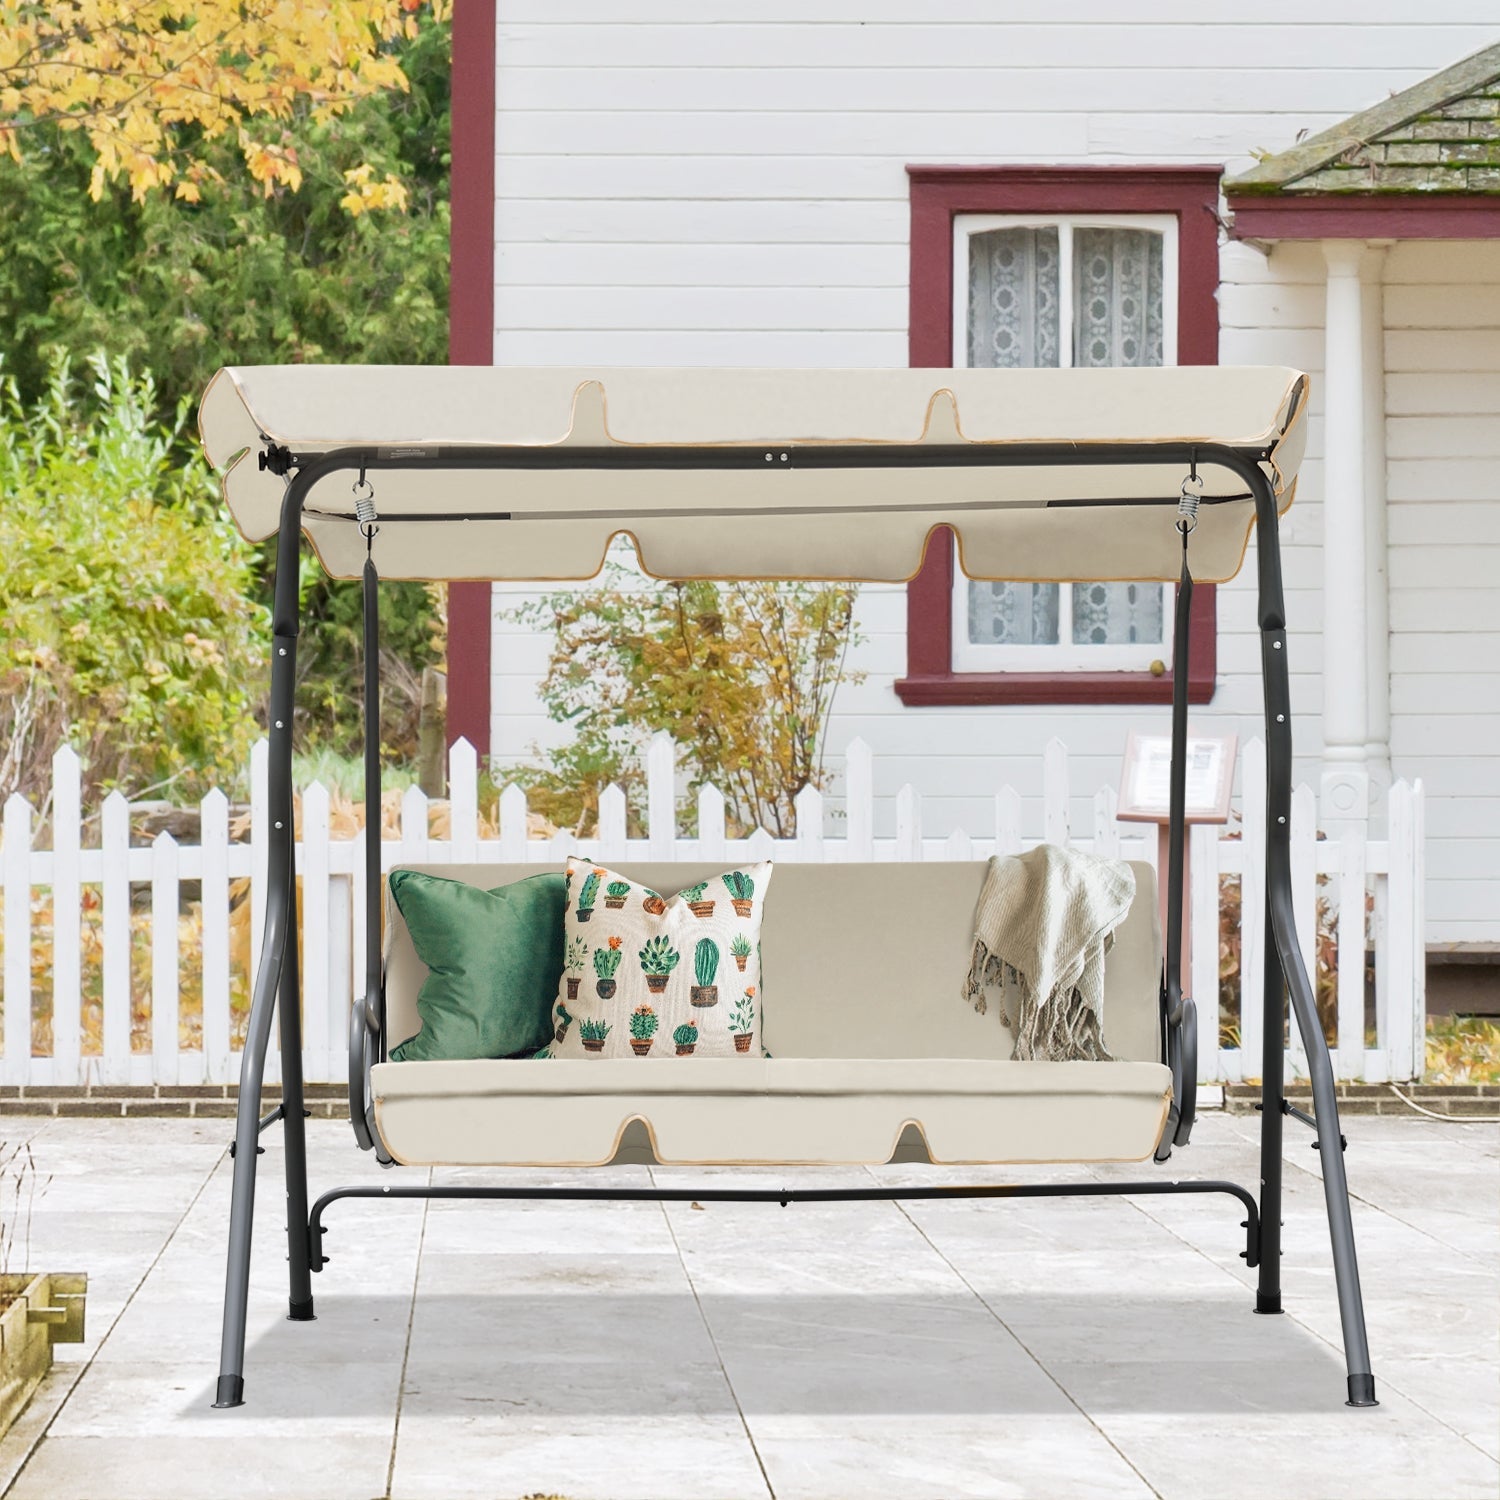 3 Seater Patio Porch Swing with Canopy.